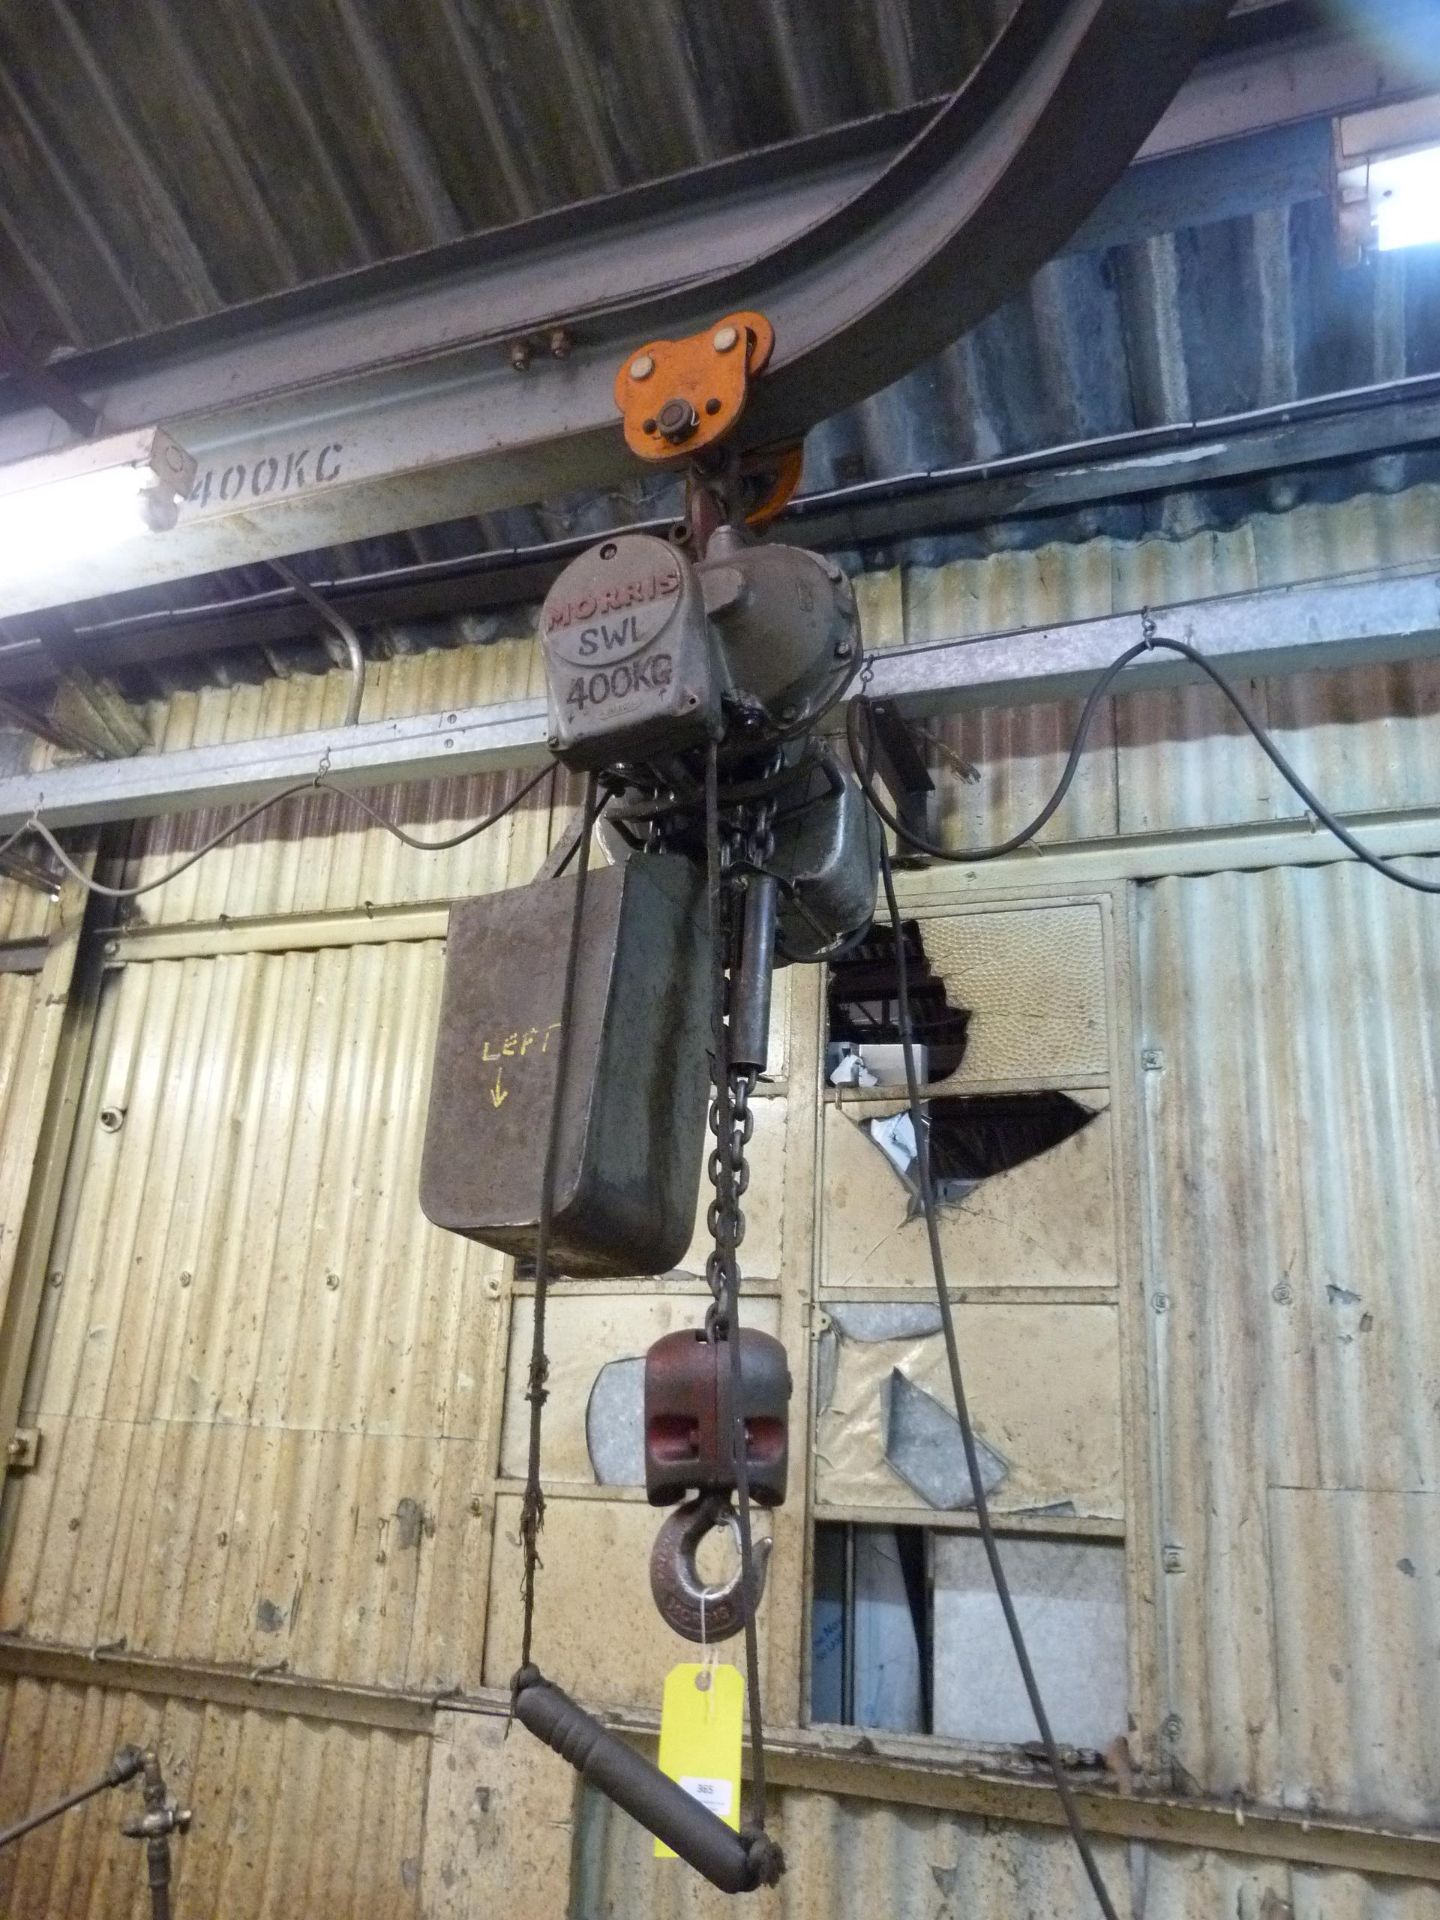 *Morris 1ton 450kg Hoist, Serial No.S60036 415v with Beam Runner and Curved Lifting Beam